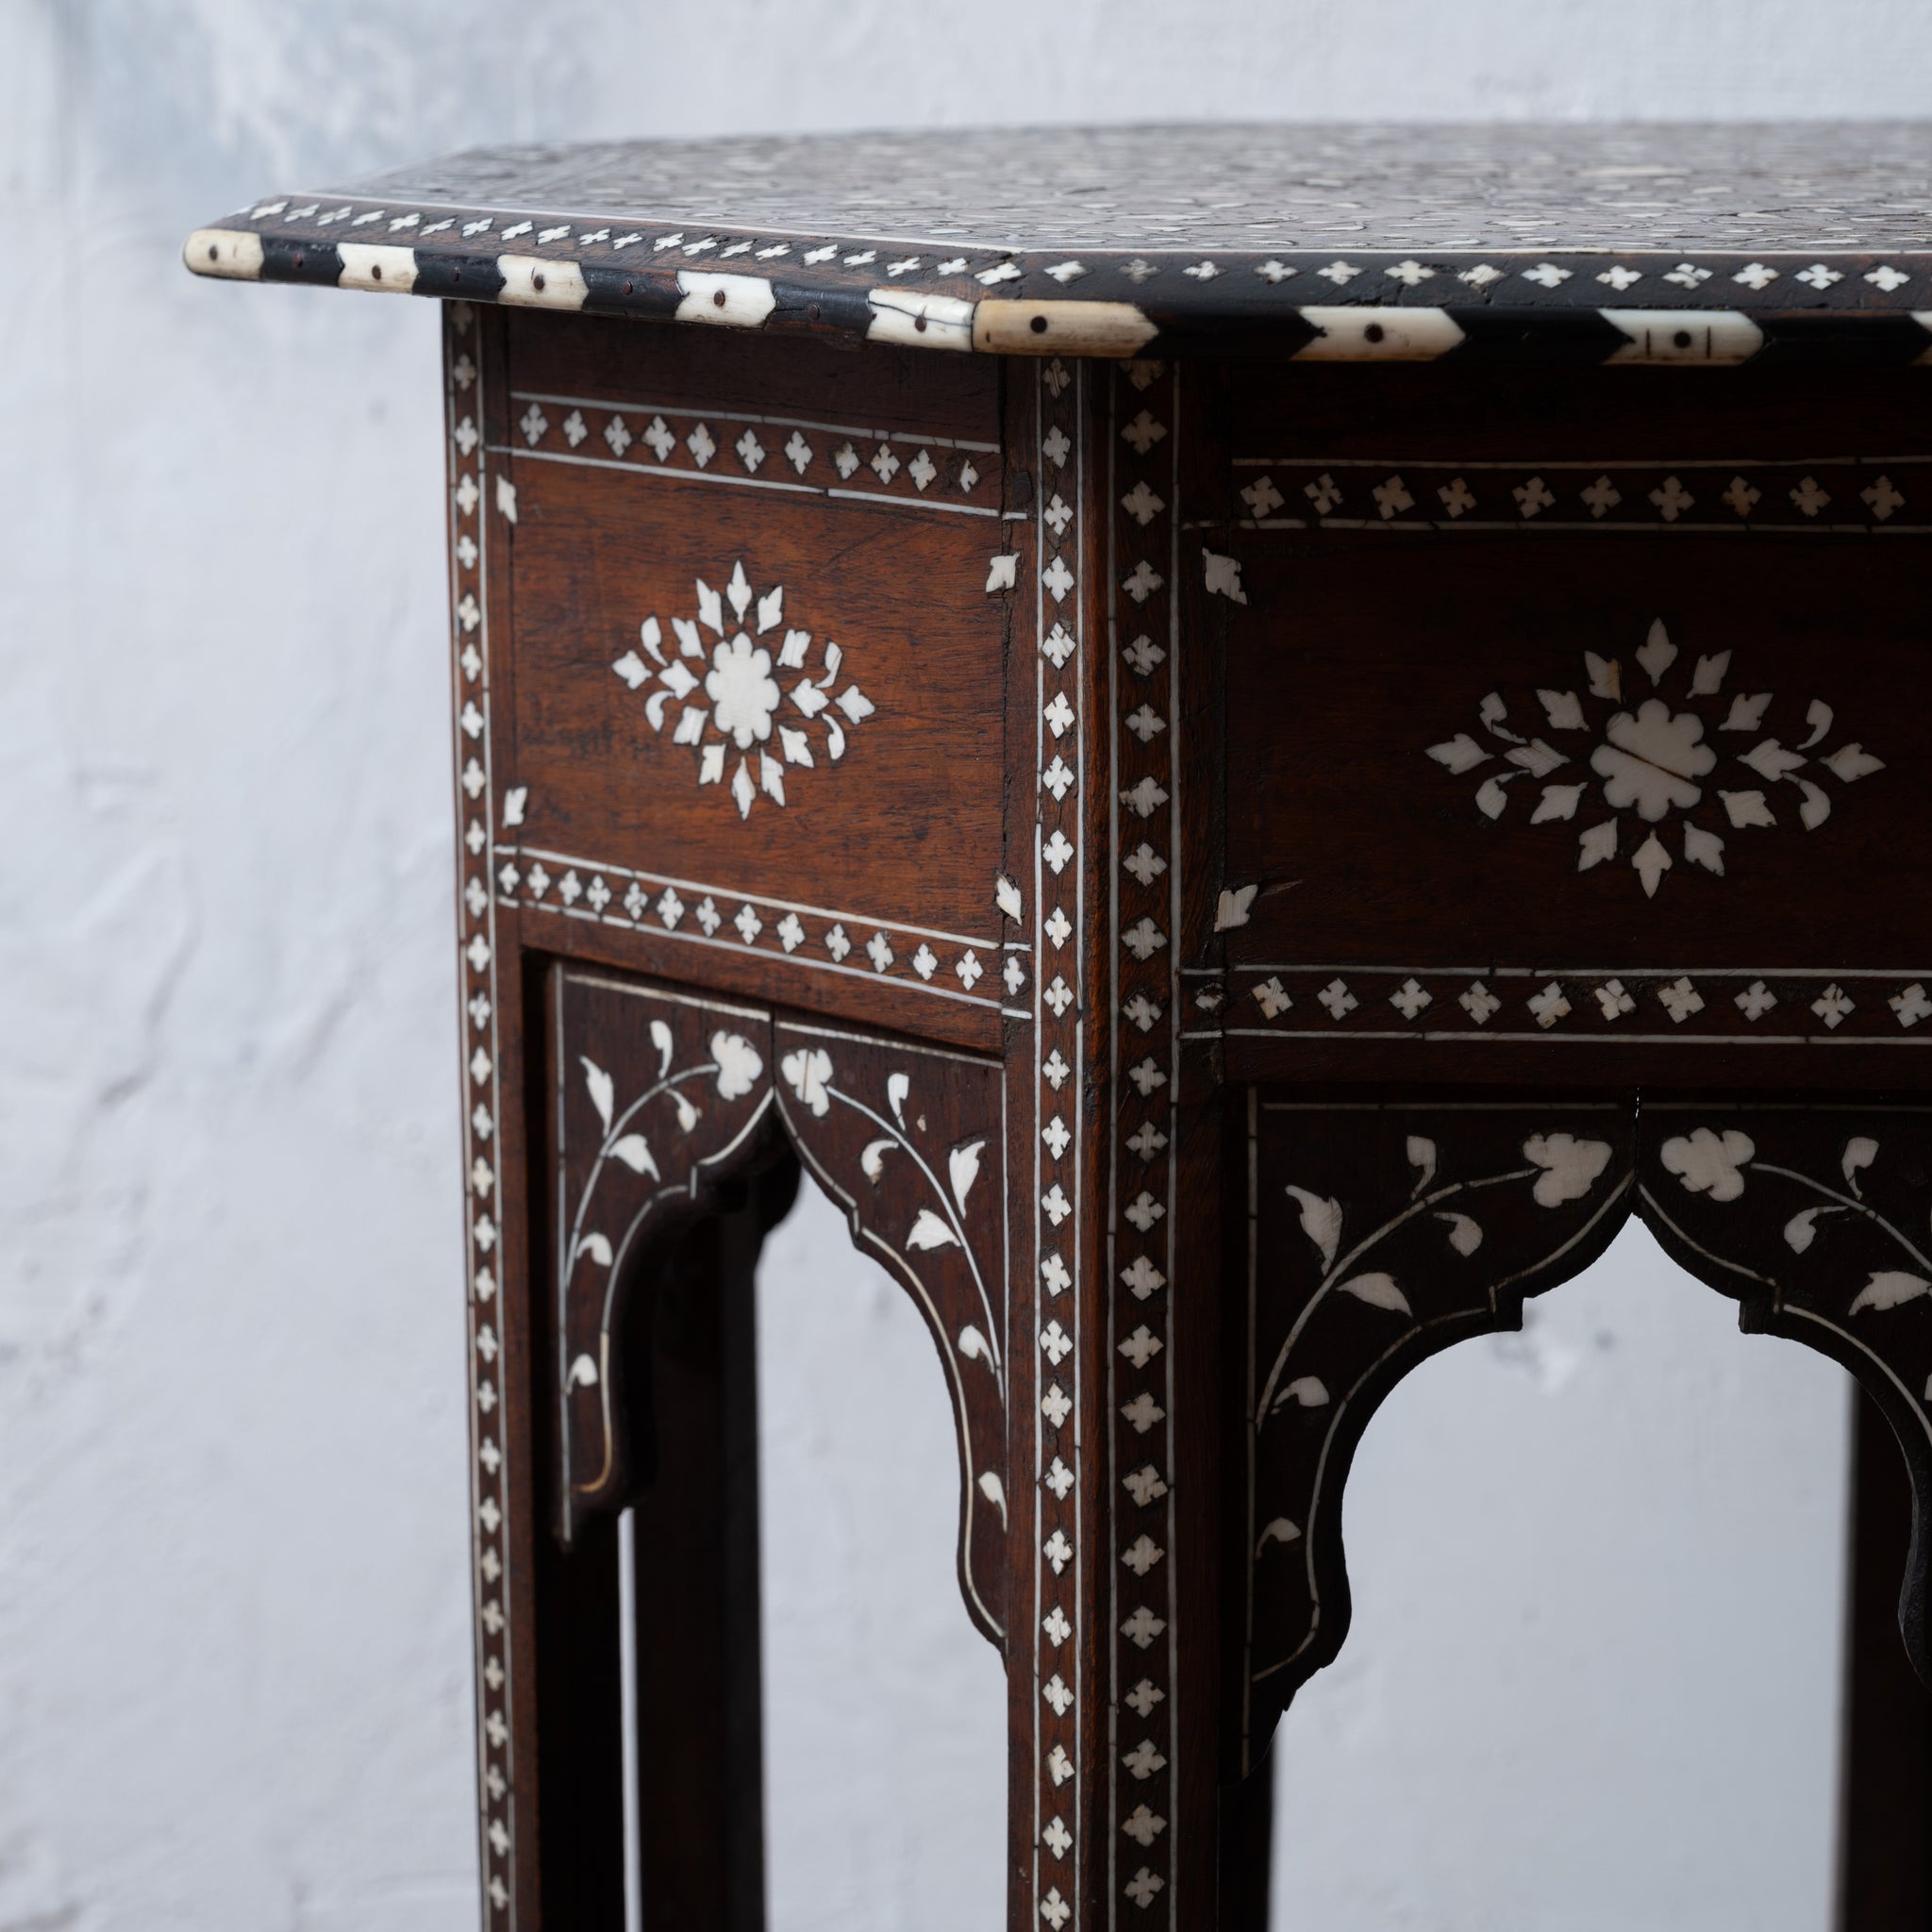 Anglo-Indian Octagonal Traveling Table - A. A. Vantine & Co.